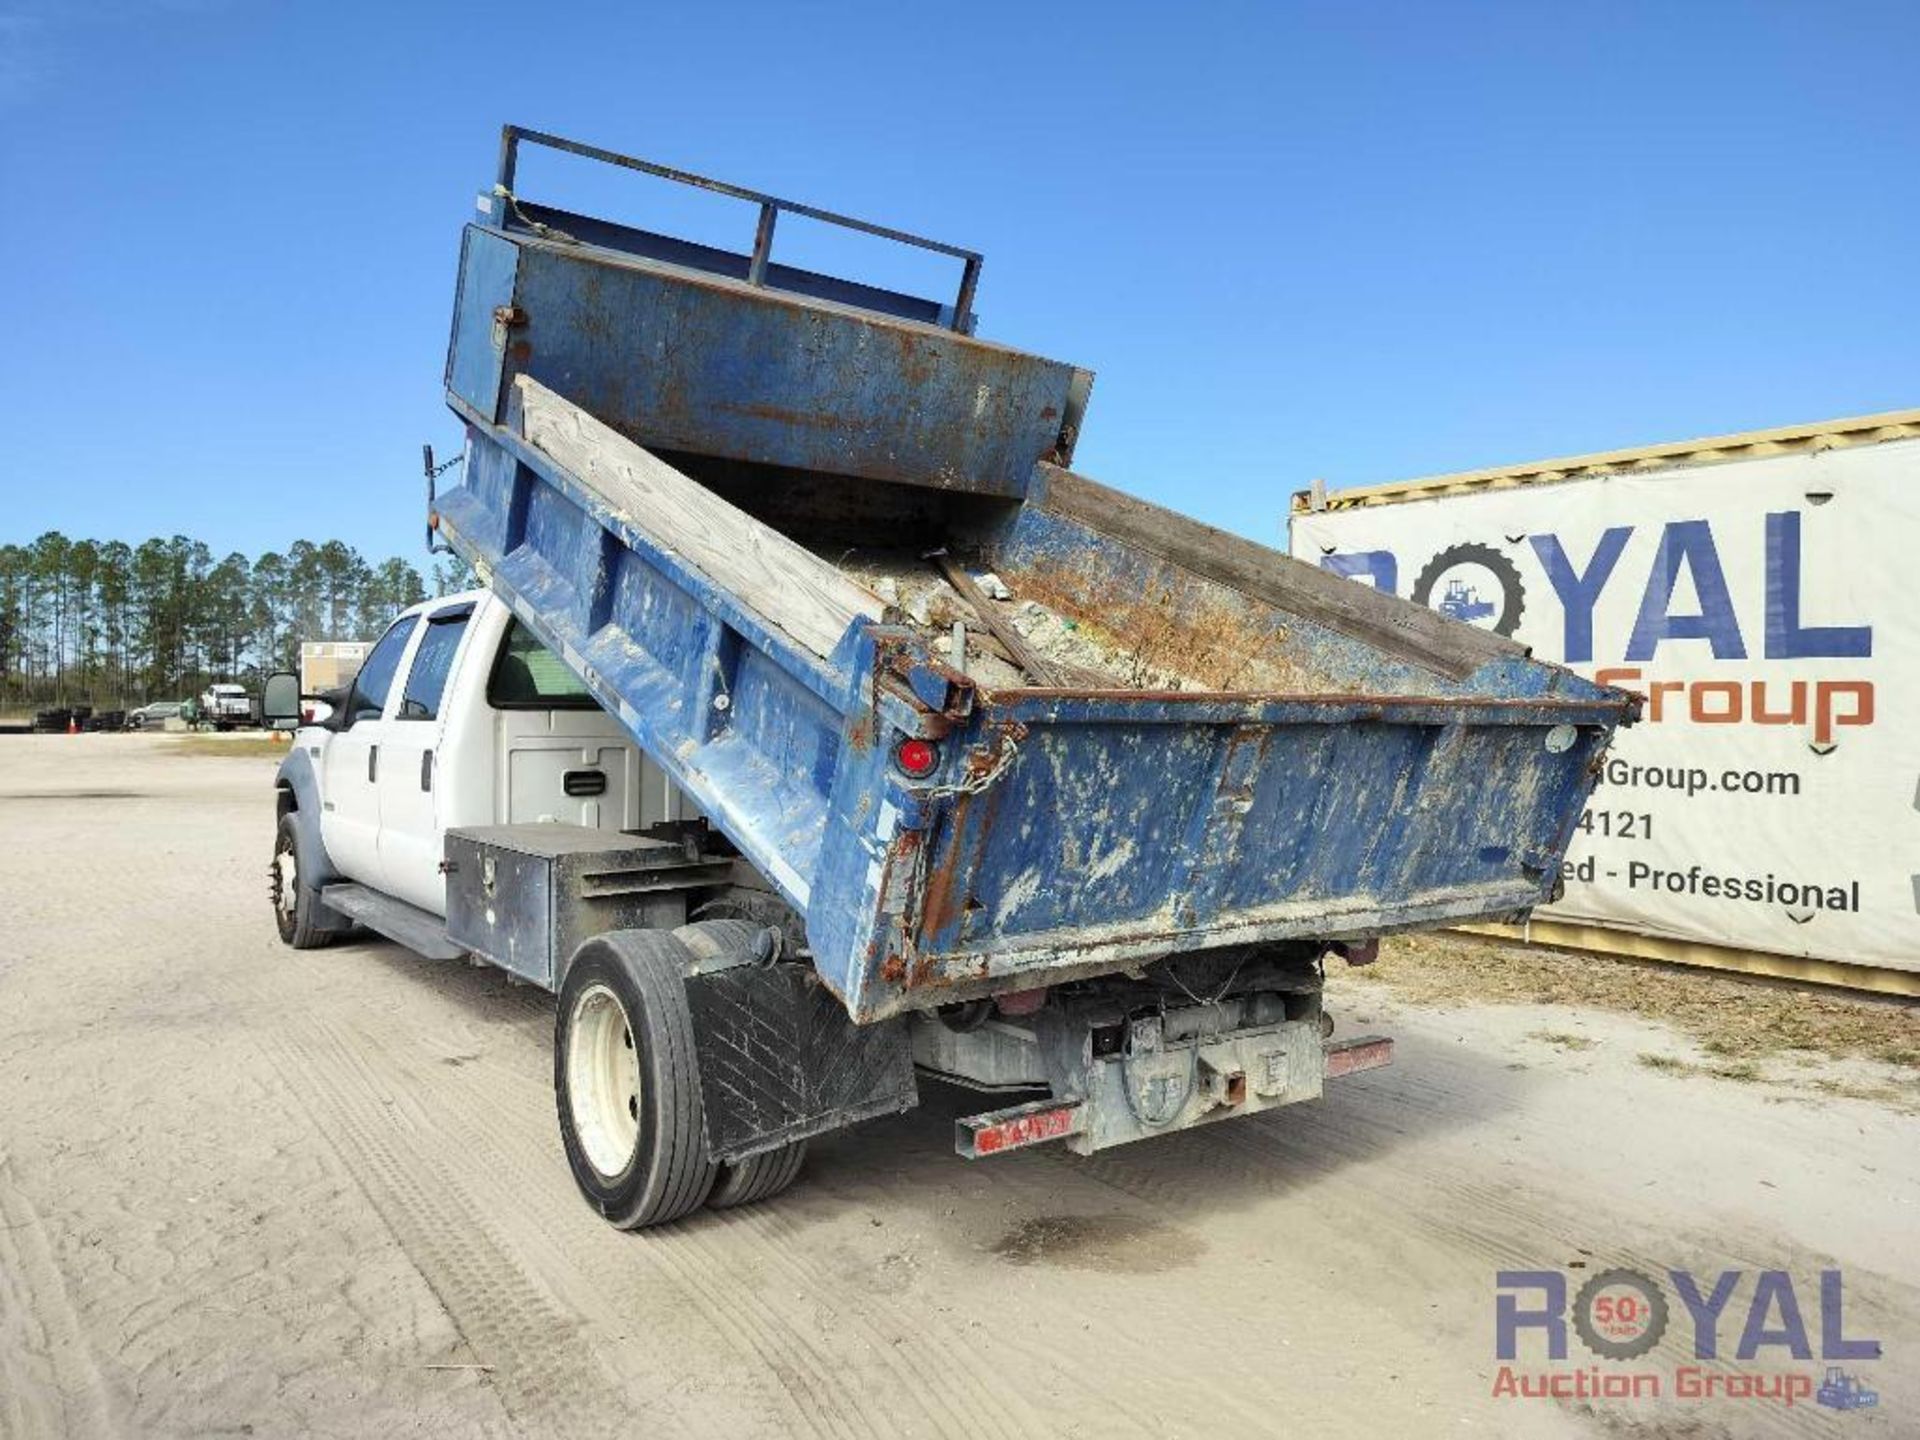 2006 Ford F350 Dump Truck - Image 4 of 27